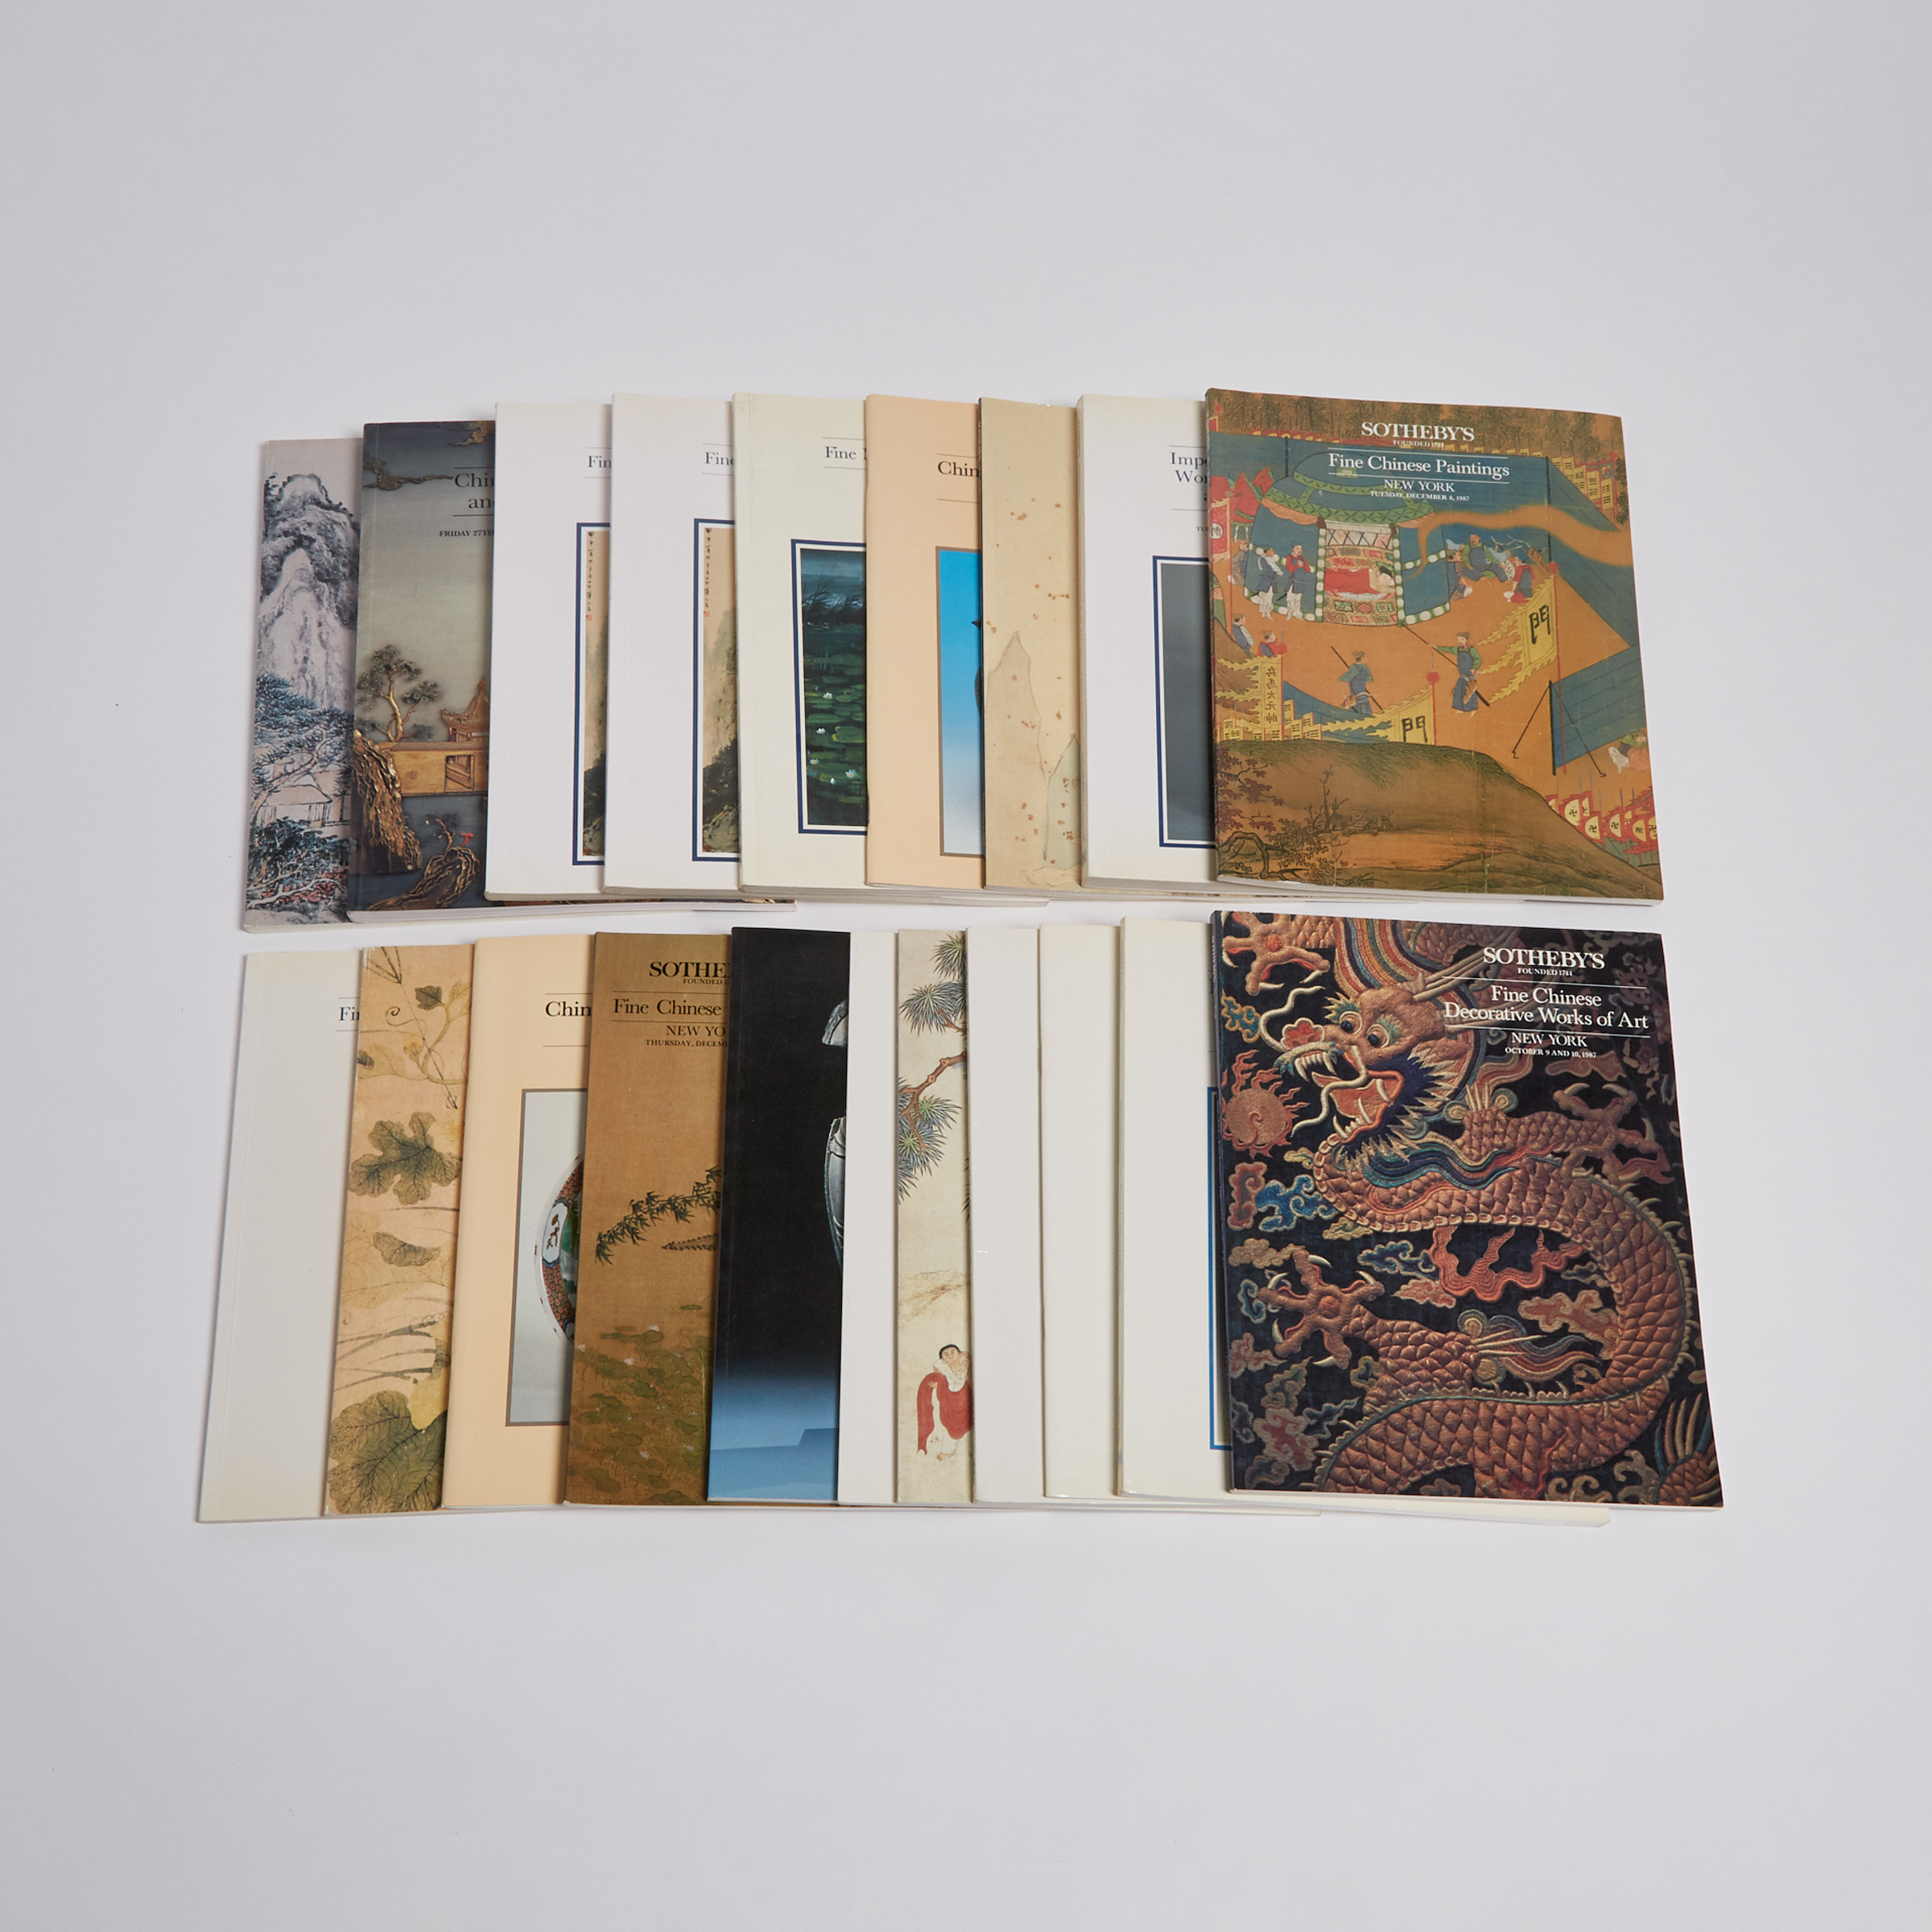 A Group of Twenty Sotheby's Chinese Art Catalogues, 1986-1990